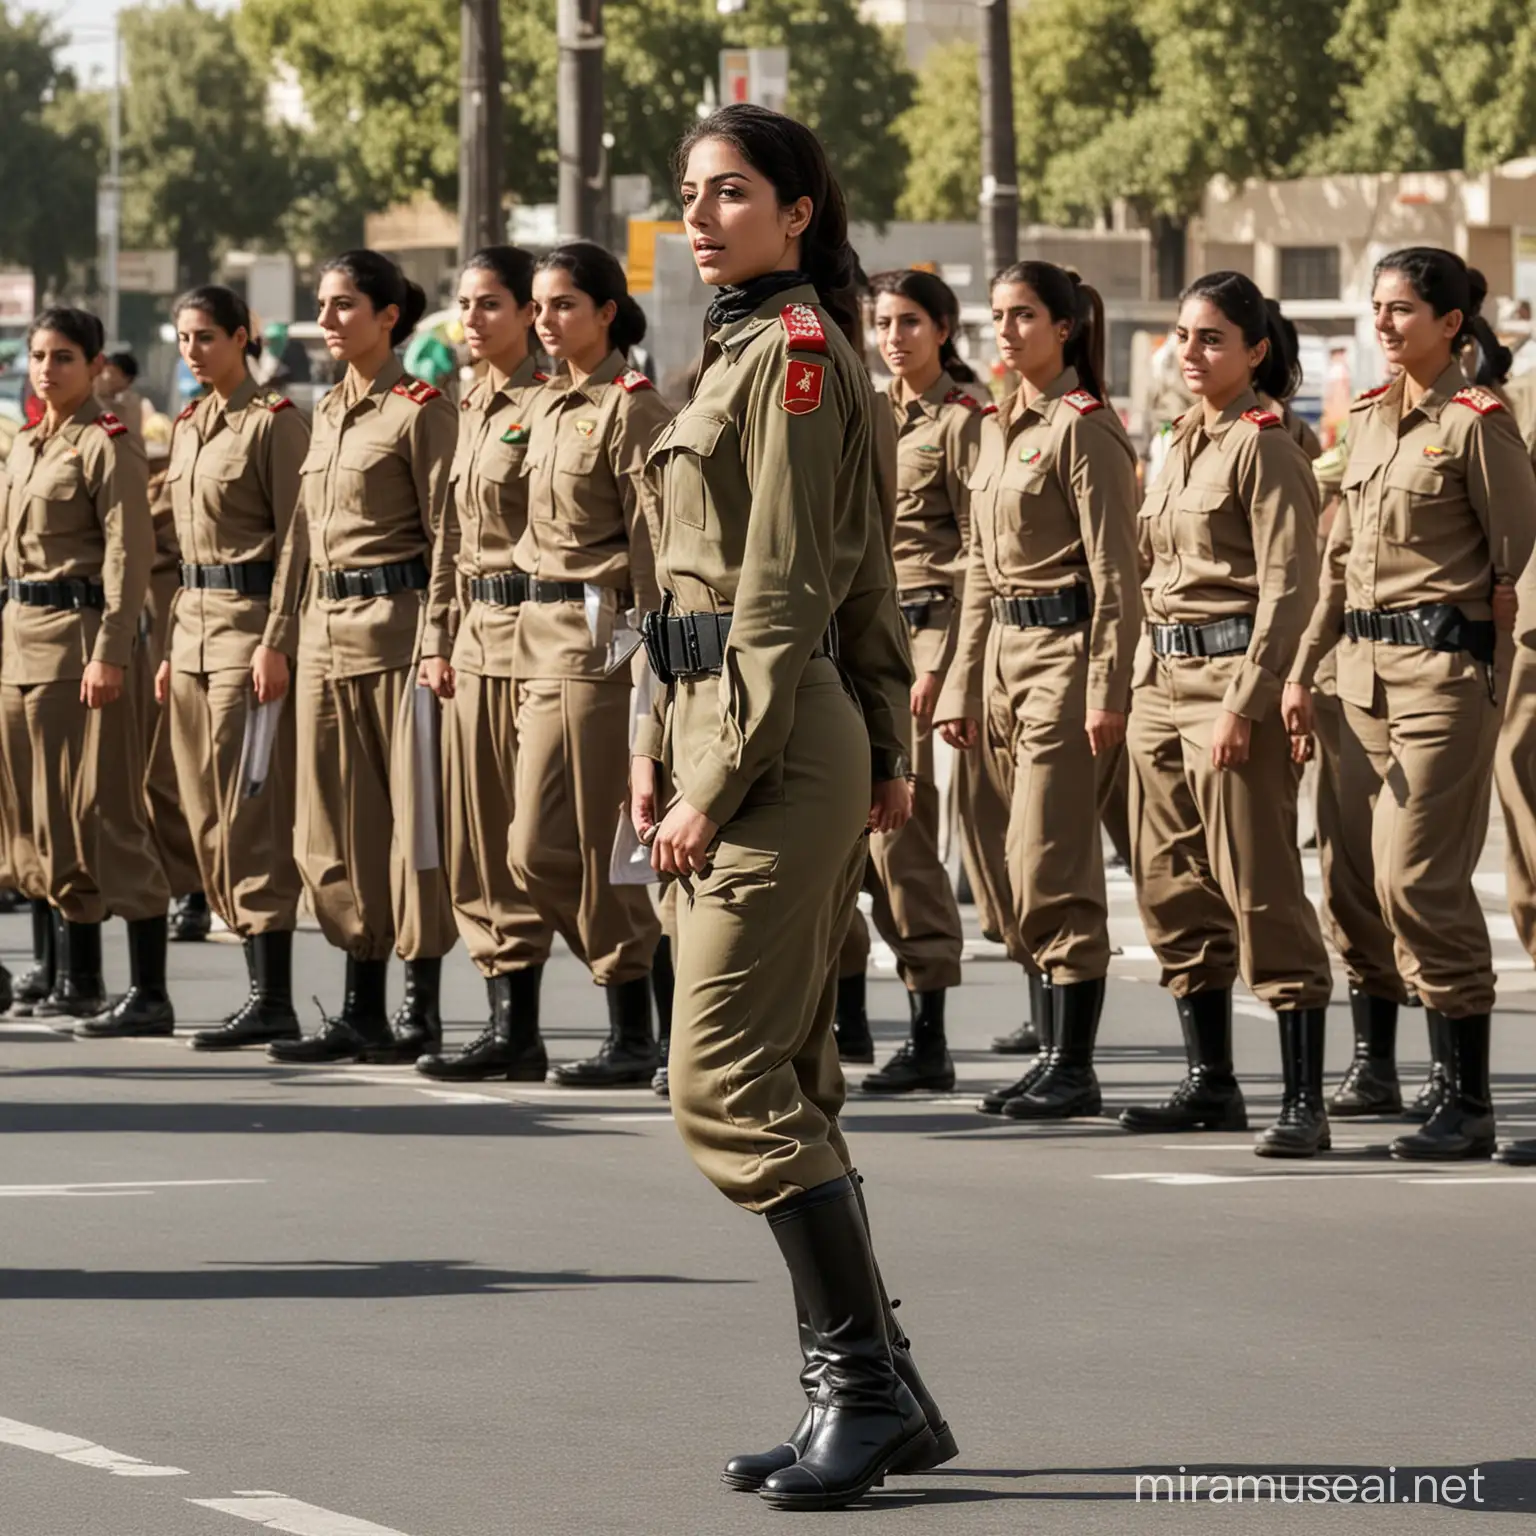 Iranian Female Soldier Marching in Tehran